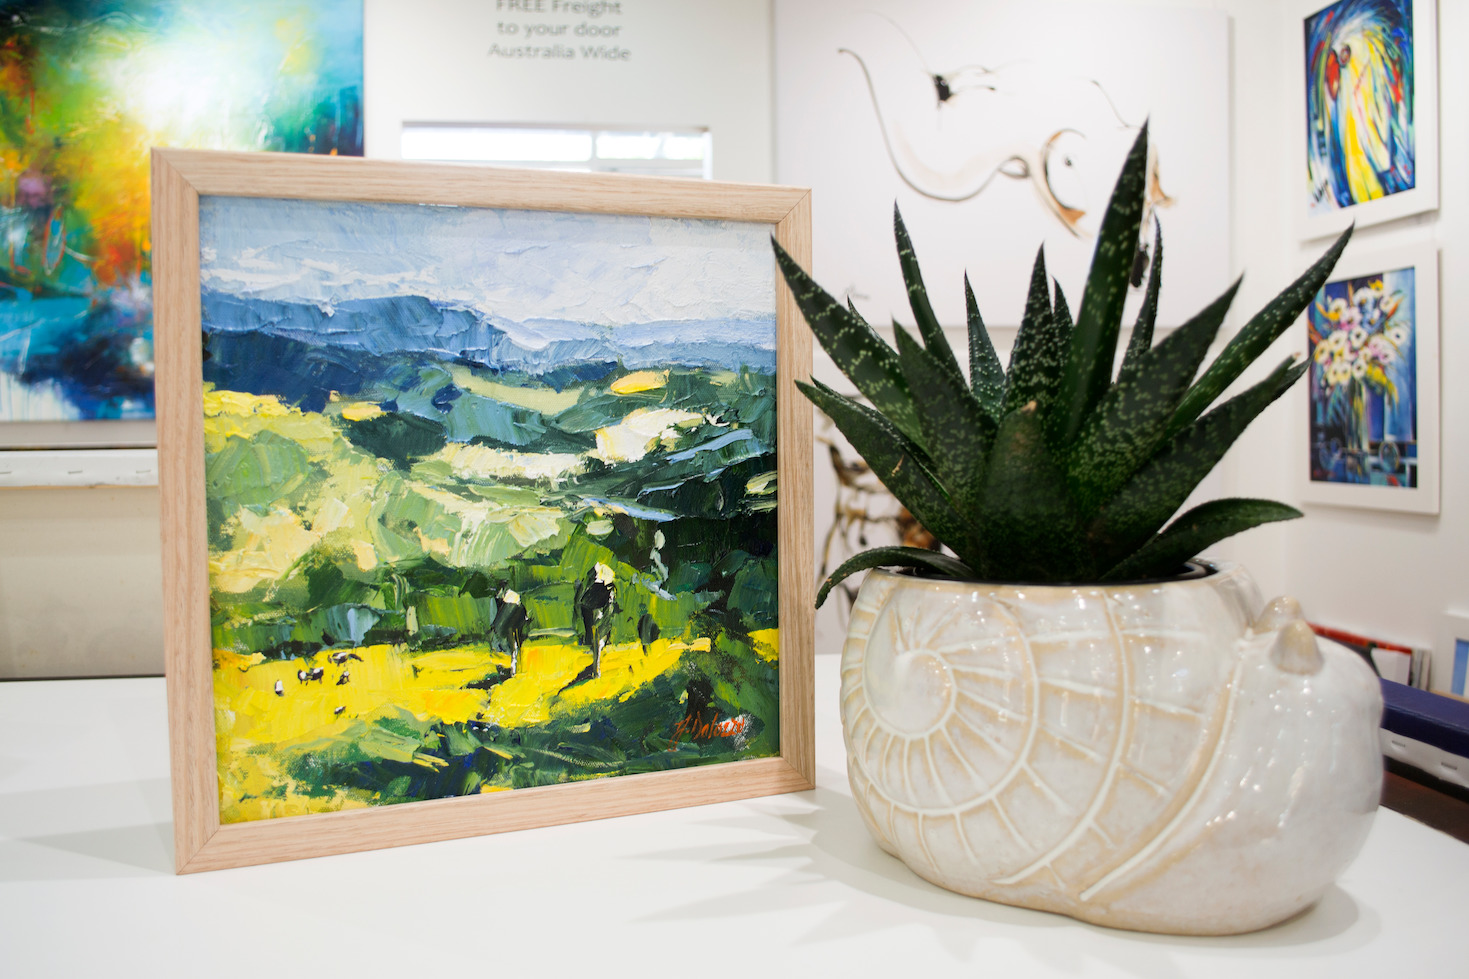 Wall Design Ideas With Landscape Painting "Gold Coast Hinterland" By Judith Dalozzo